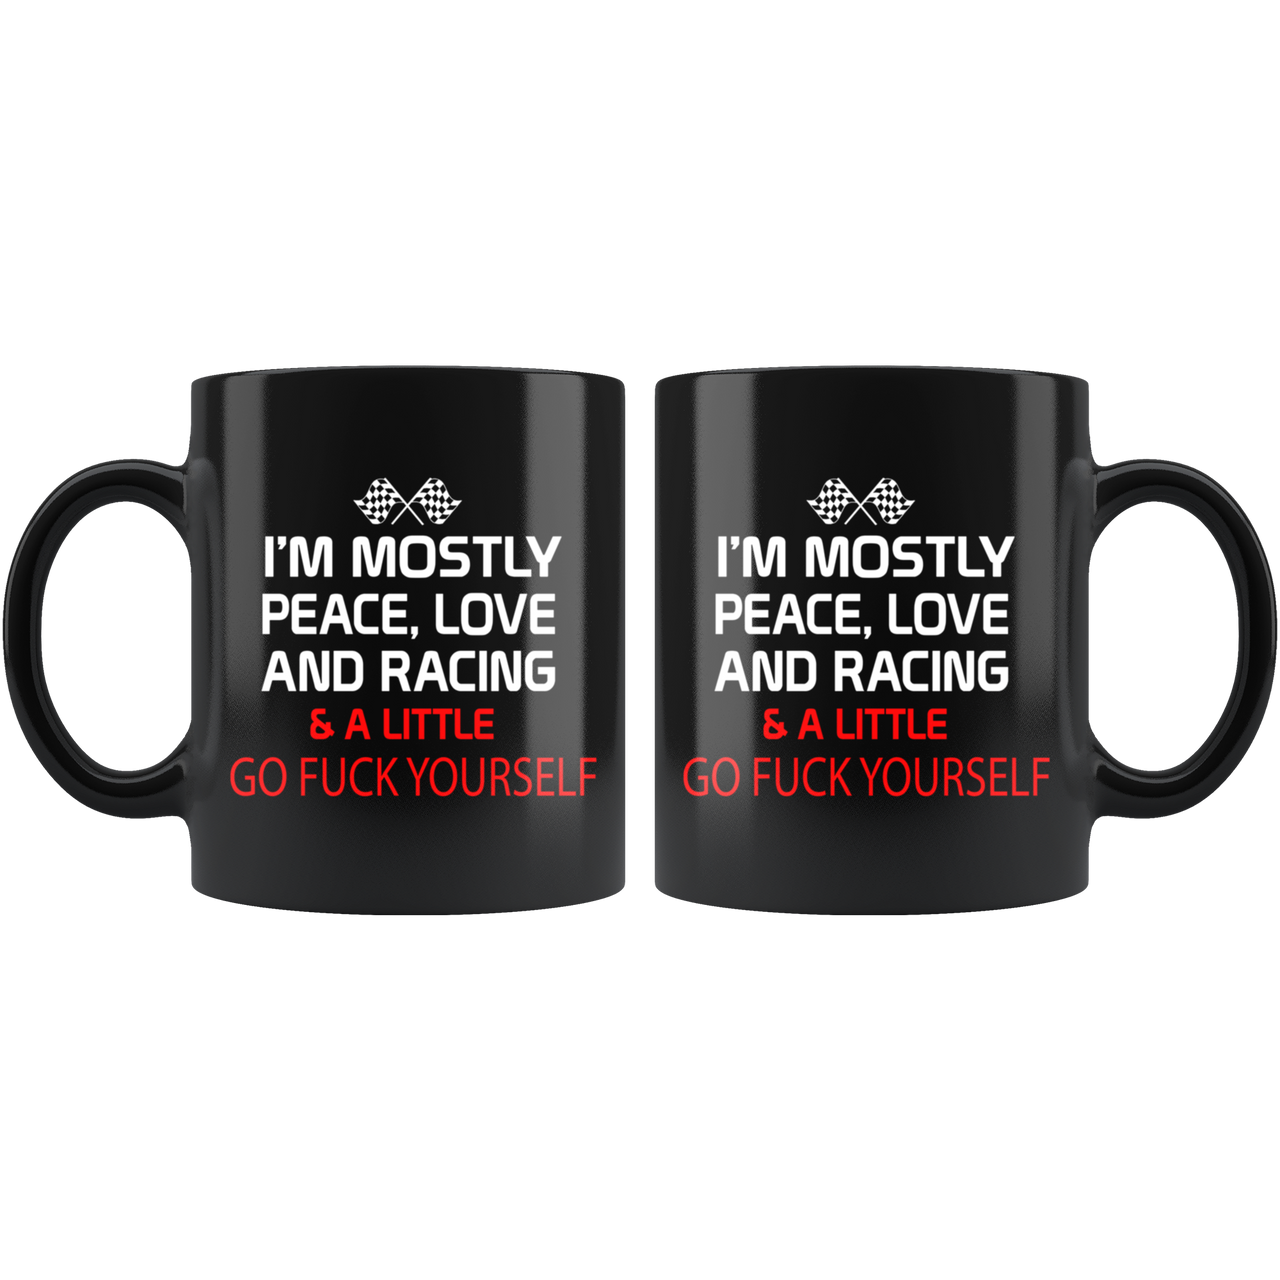 I'm Mostly Peace Love And Racing & A Little G F Yourself Mug!